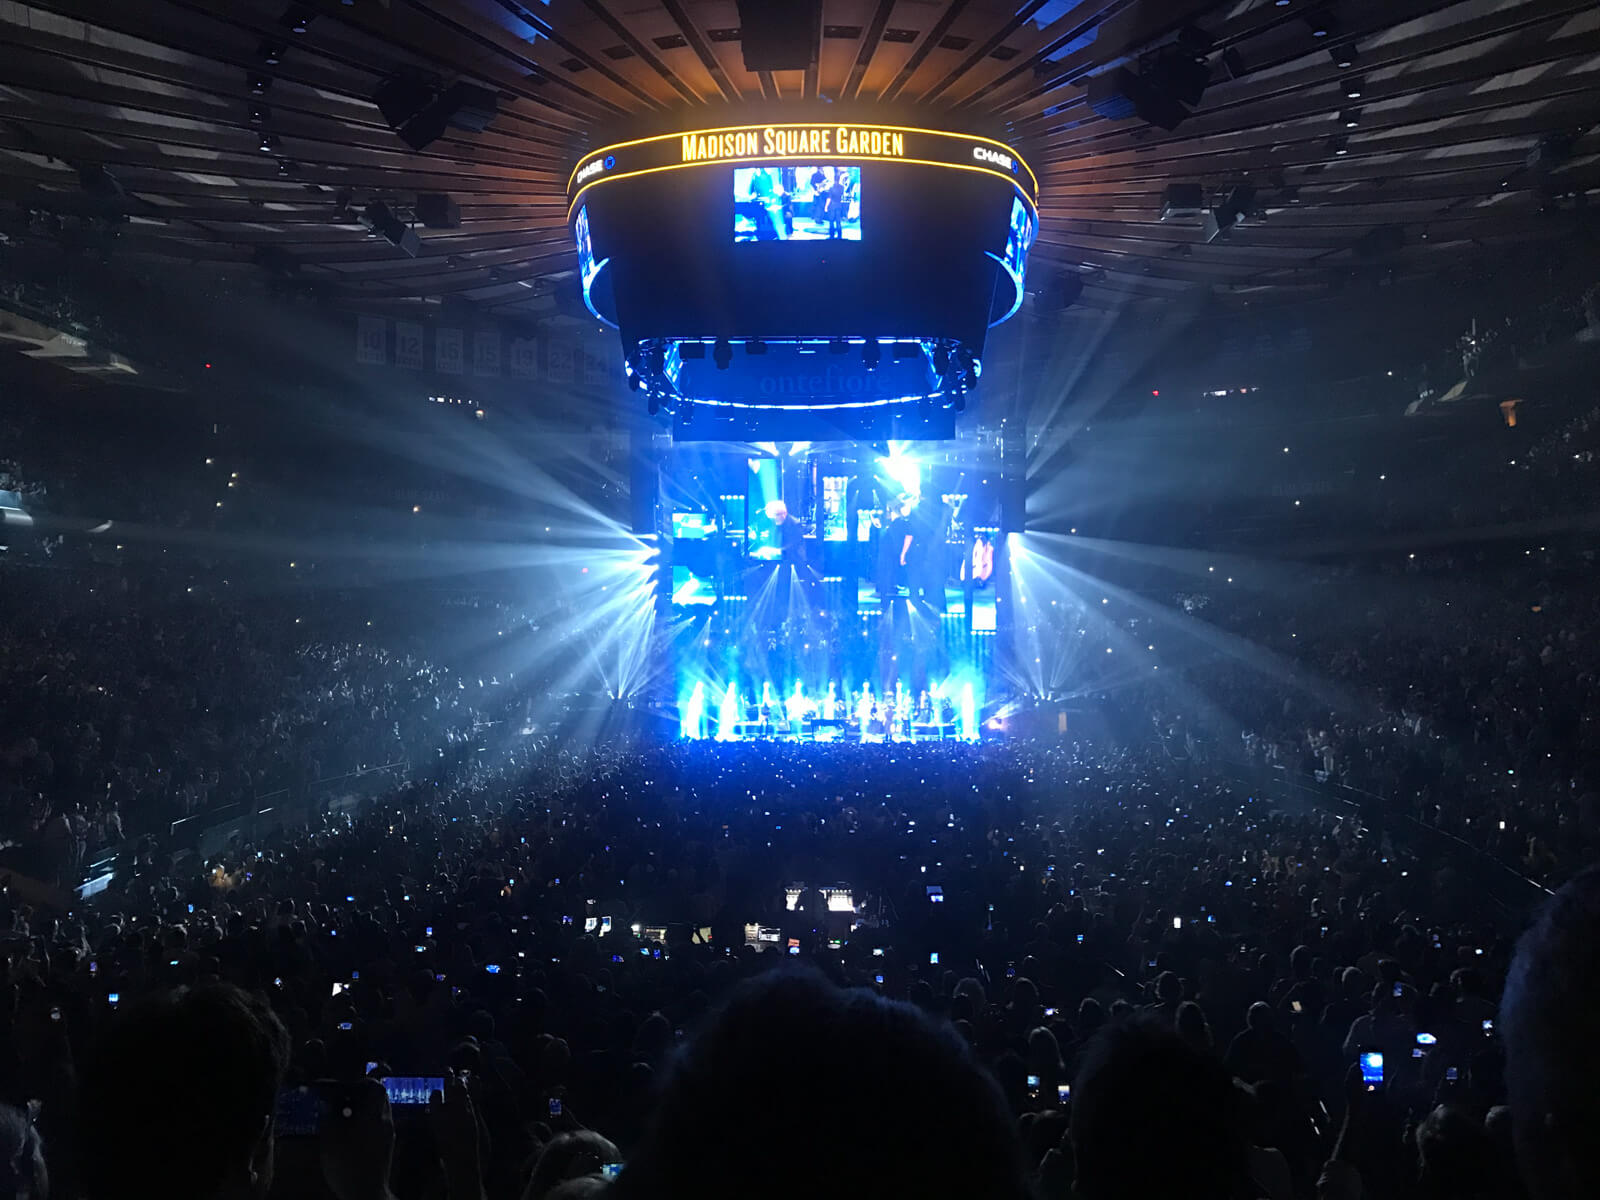 The inside of a concert venue. The stage has a lot of blue lighting and a fixture above the stage and on the ceiling of the venue reads “Madison Square Garden” and has screens with close views of what is happening on stage